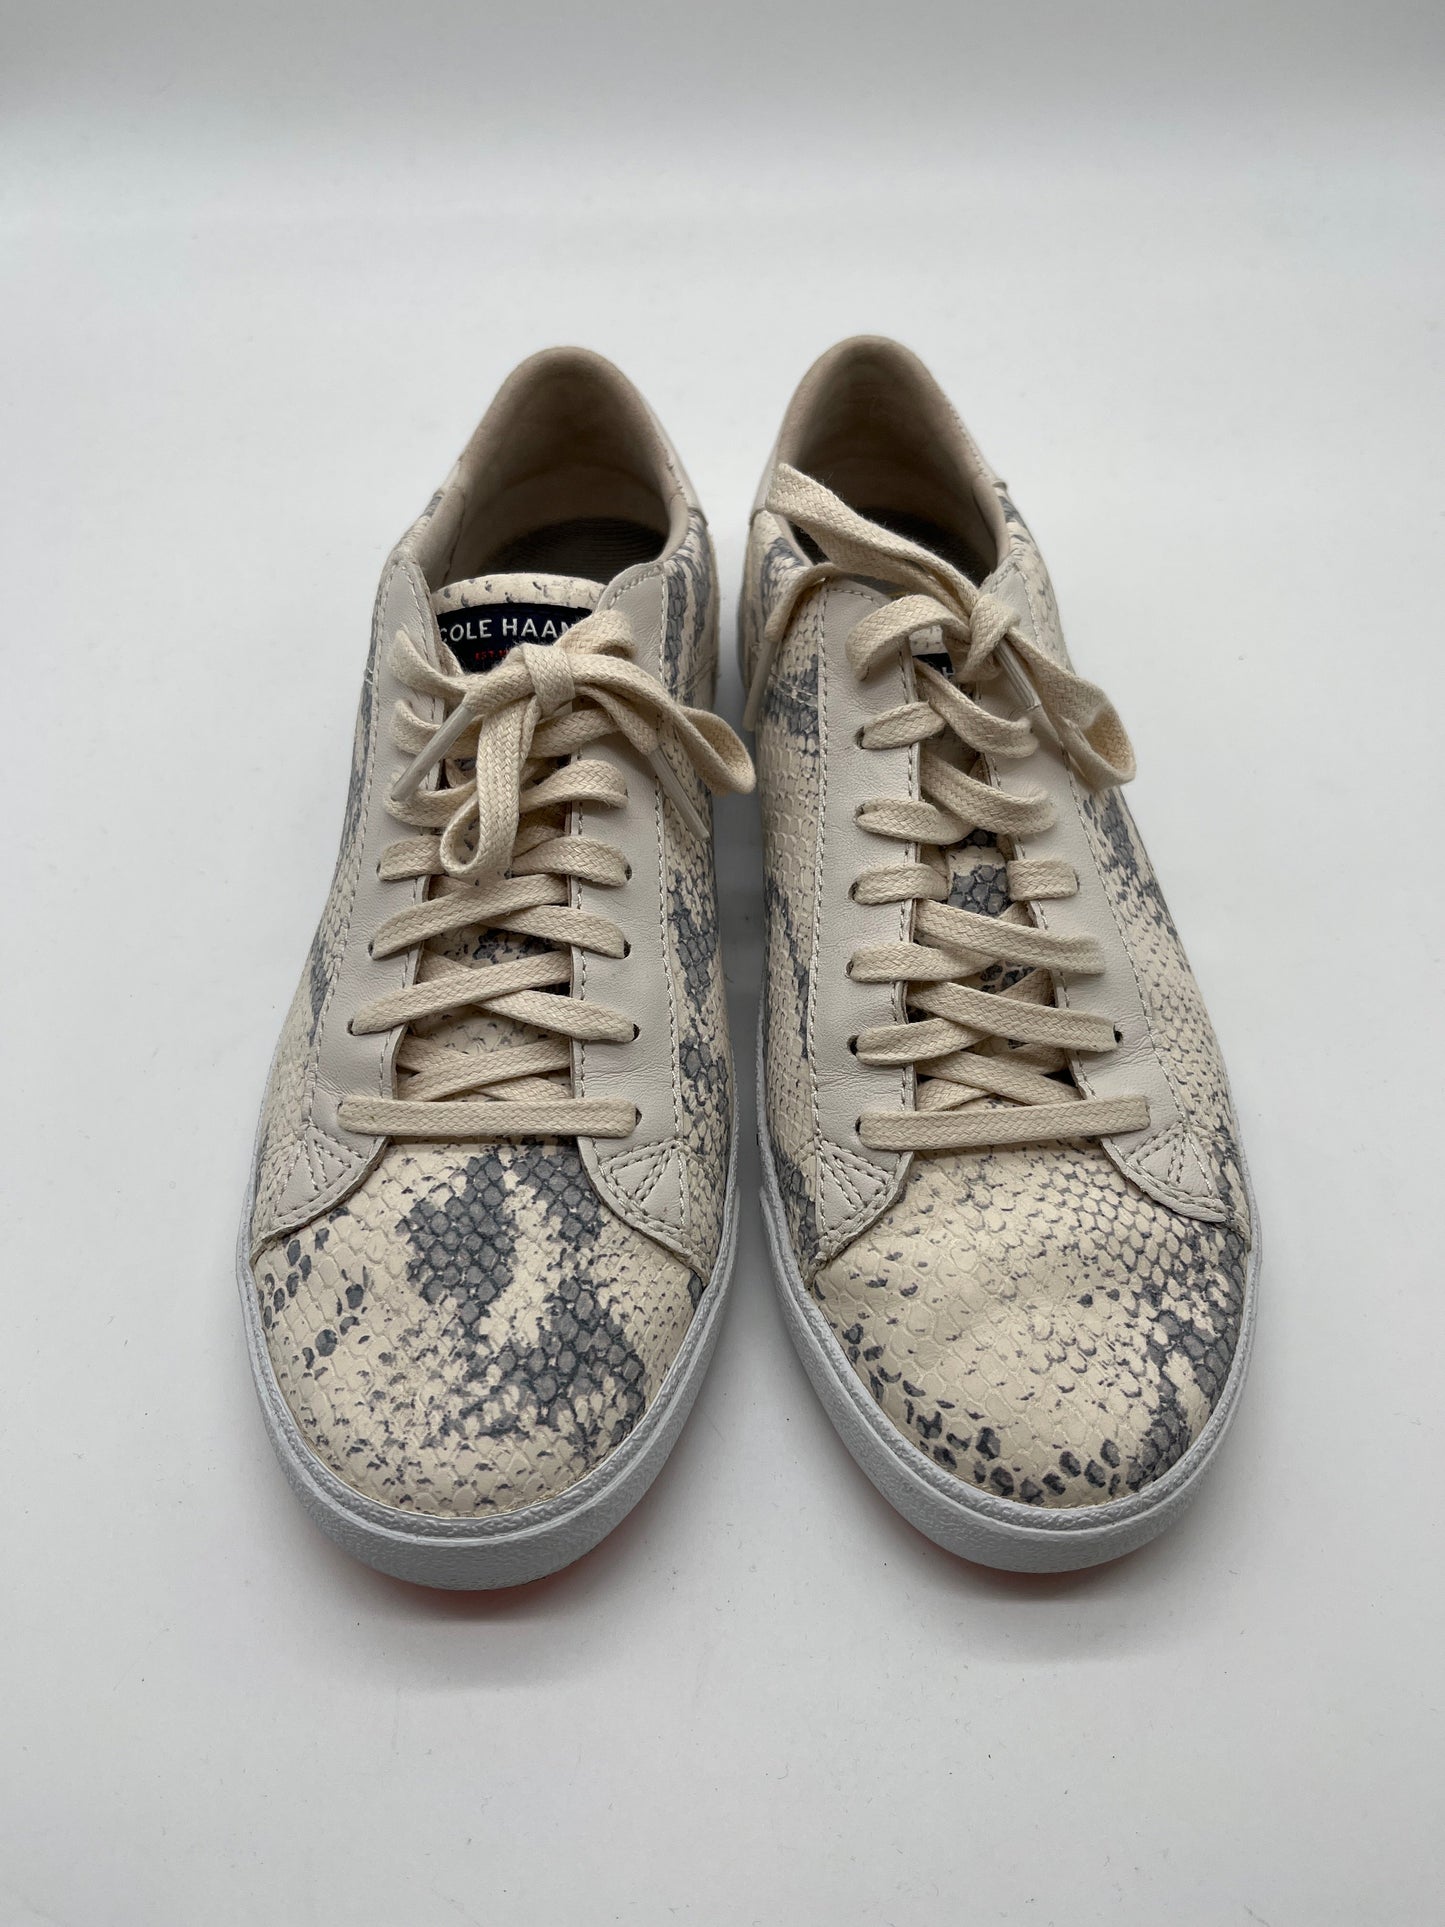 Snakeskin Print Shoes Sneakers Cole-haan, Size 8.5